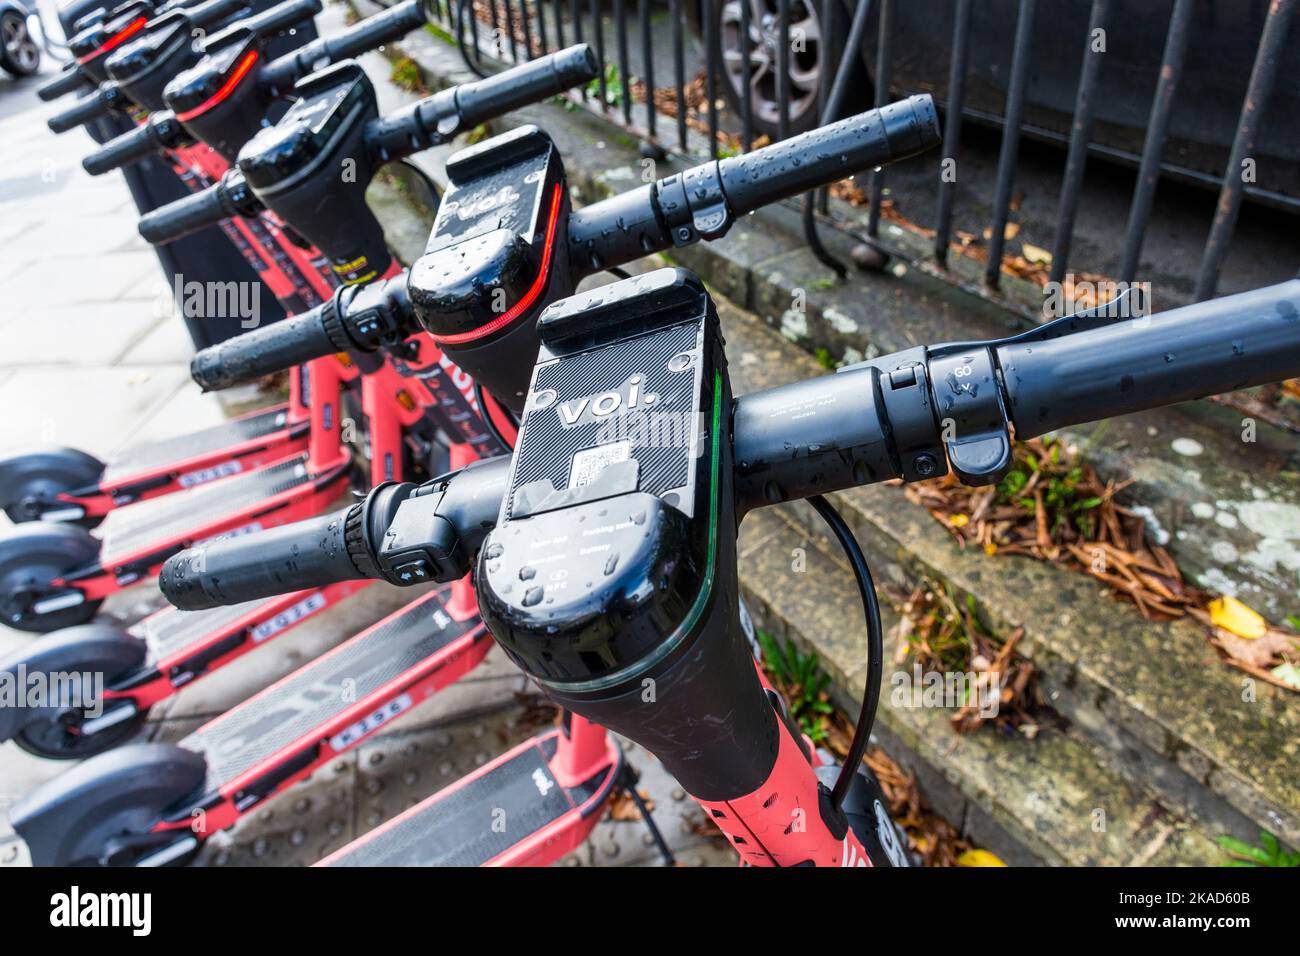 Voi  E-Scooters in Bath, Somerset, England, the only World Heritage City in the UK. Stock Photo